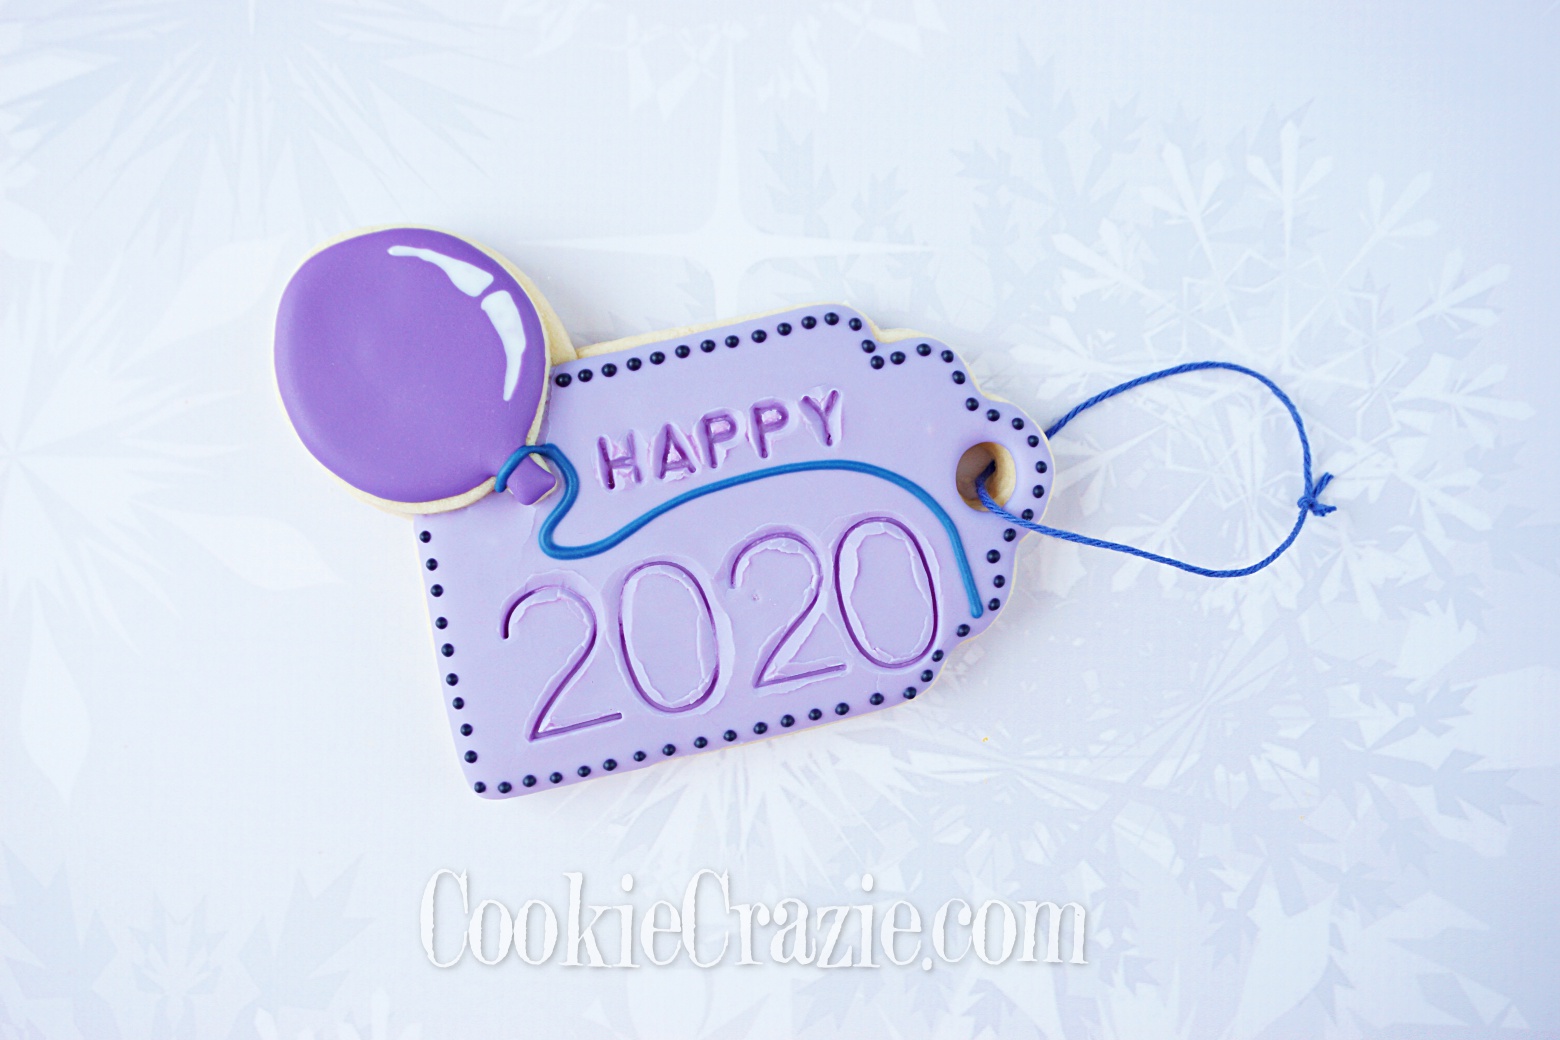  2020 New Year Balloon Gift Tag Decorated Sugar Cookie YouTube video  HERE  